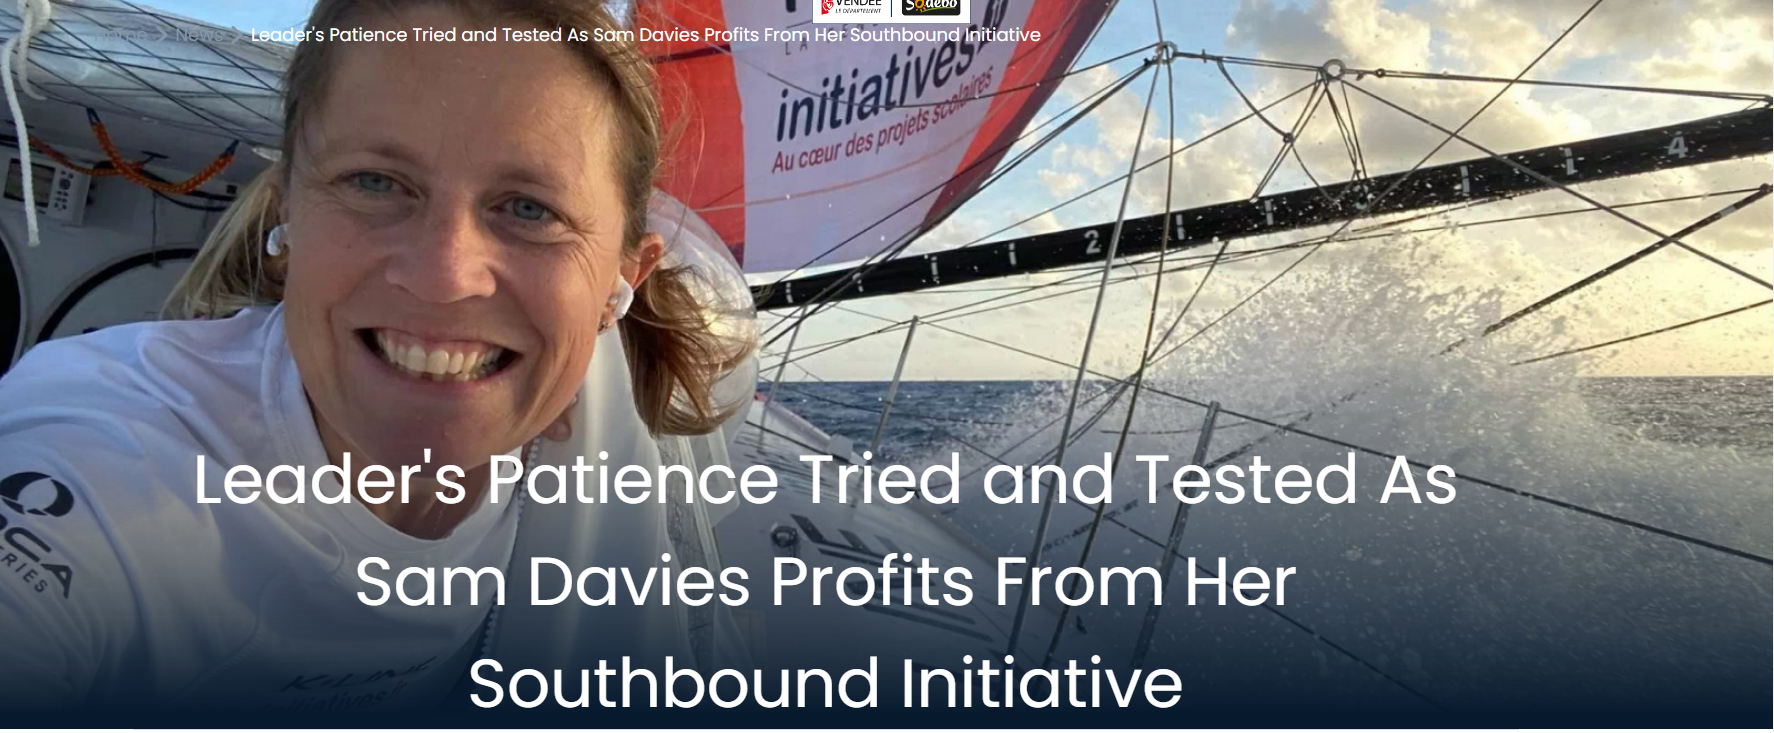 Leader's patience tried and tested as Sam Davies profits from her southbound initiative